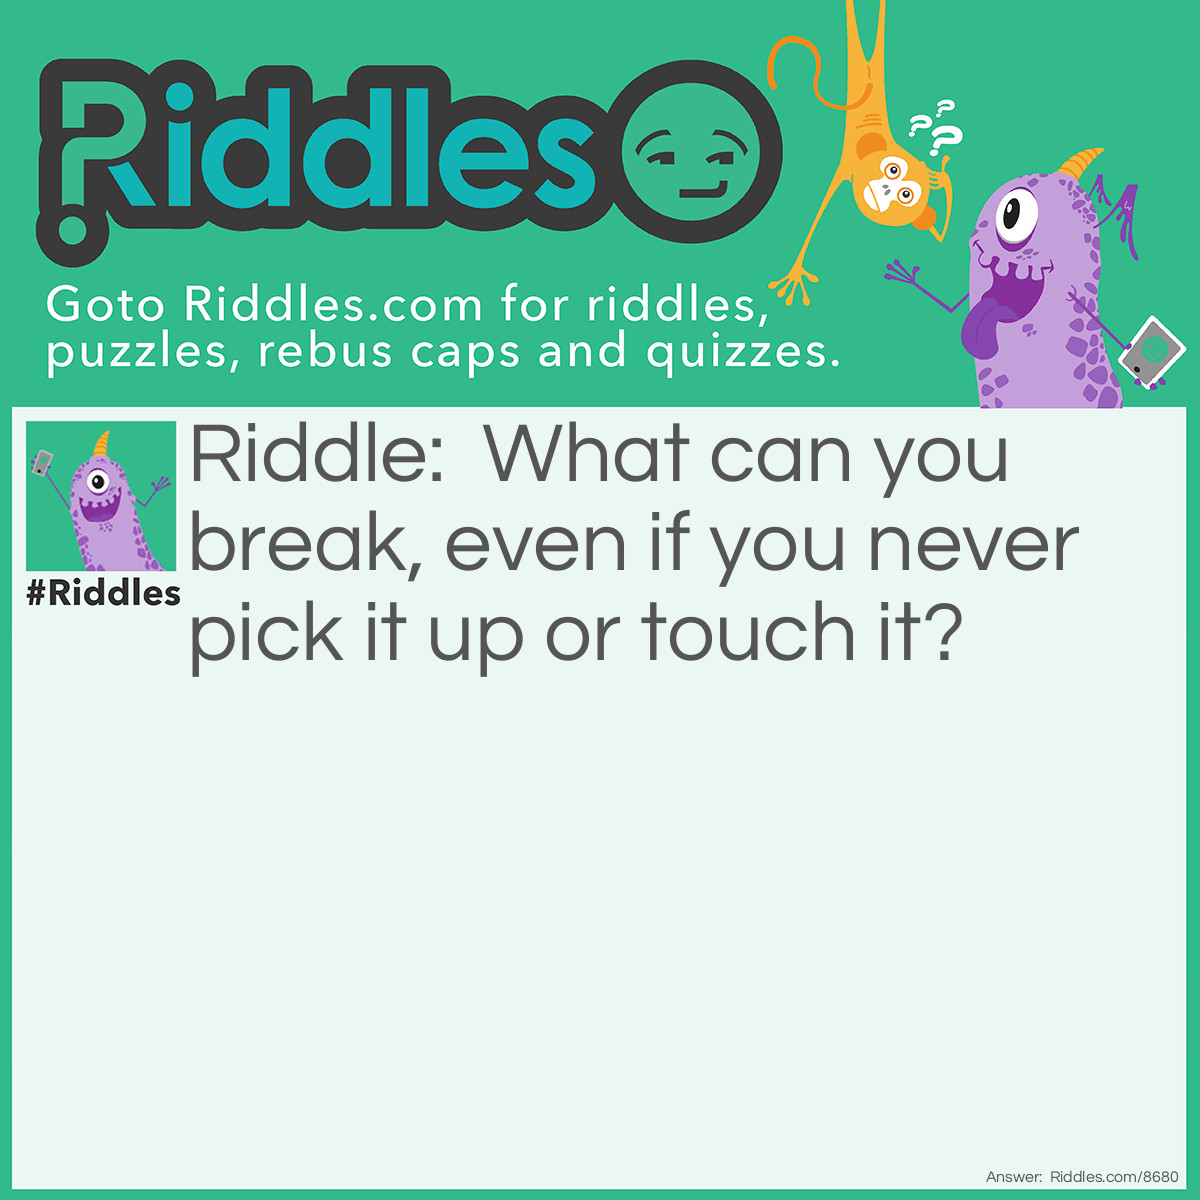 Riddle: What can you break, even if you never pick it up or touch it? Answer: A Promise